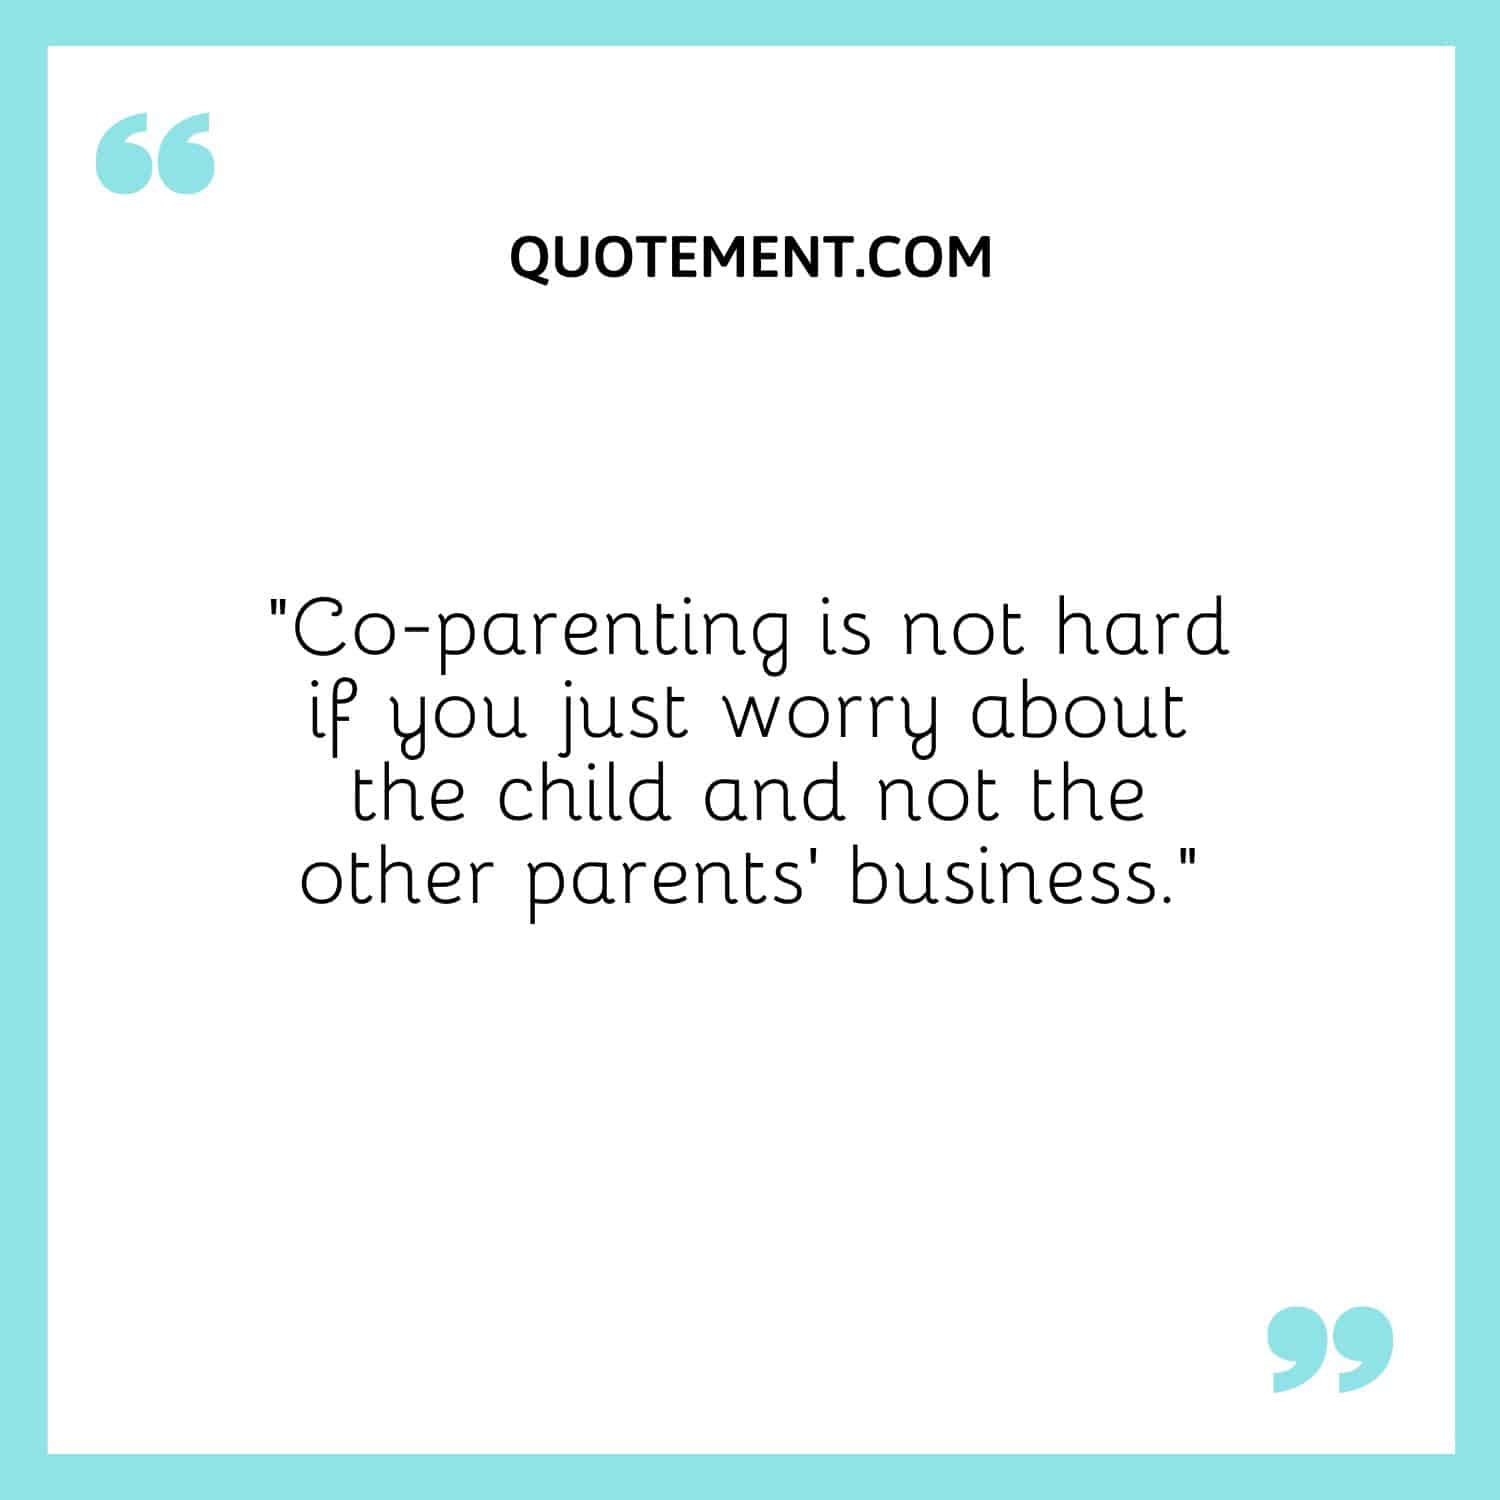 Co-parenting is not hard if you just worry about the child and not the other parents’ business